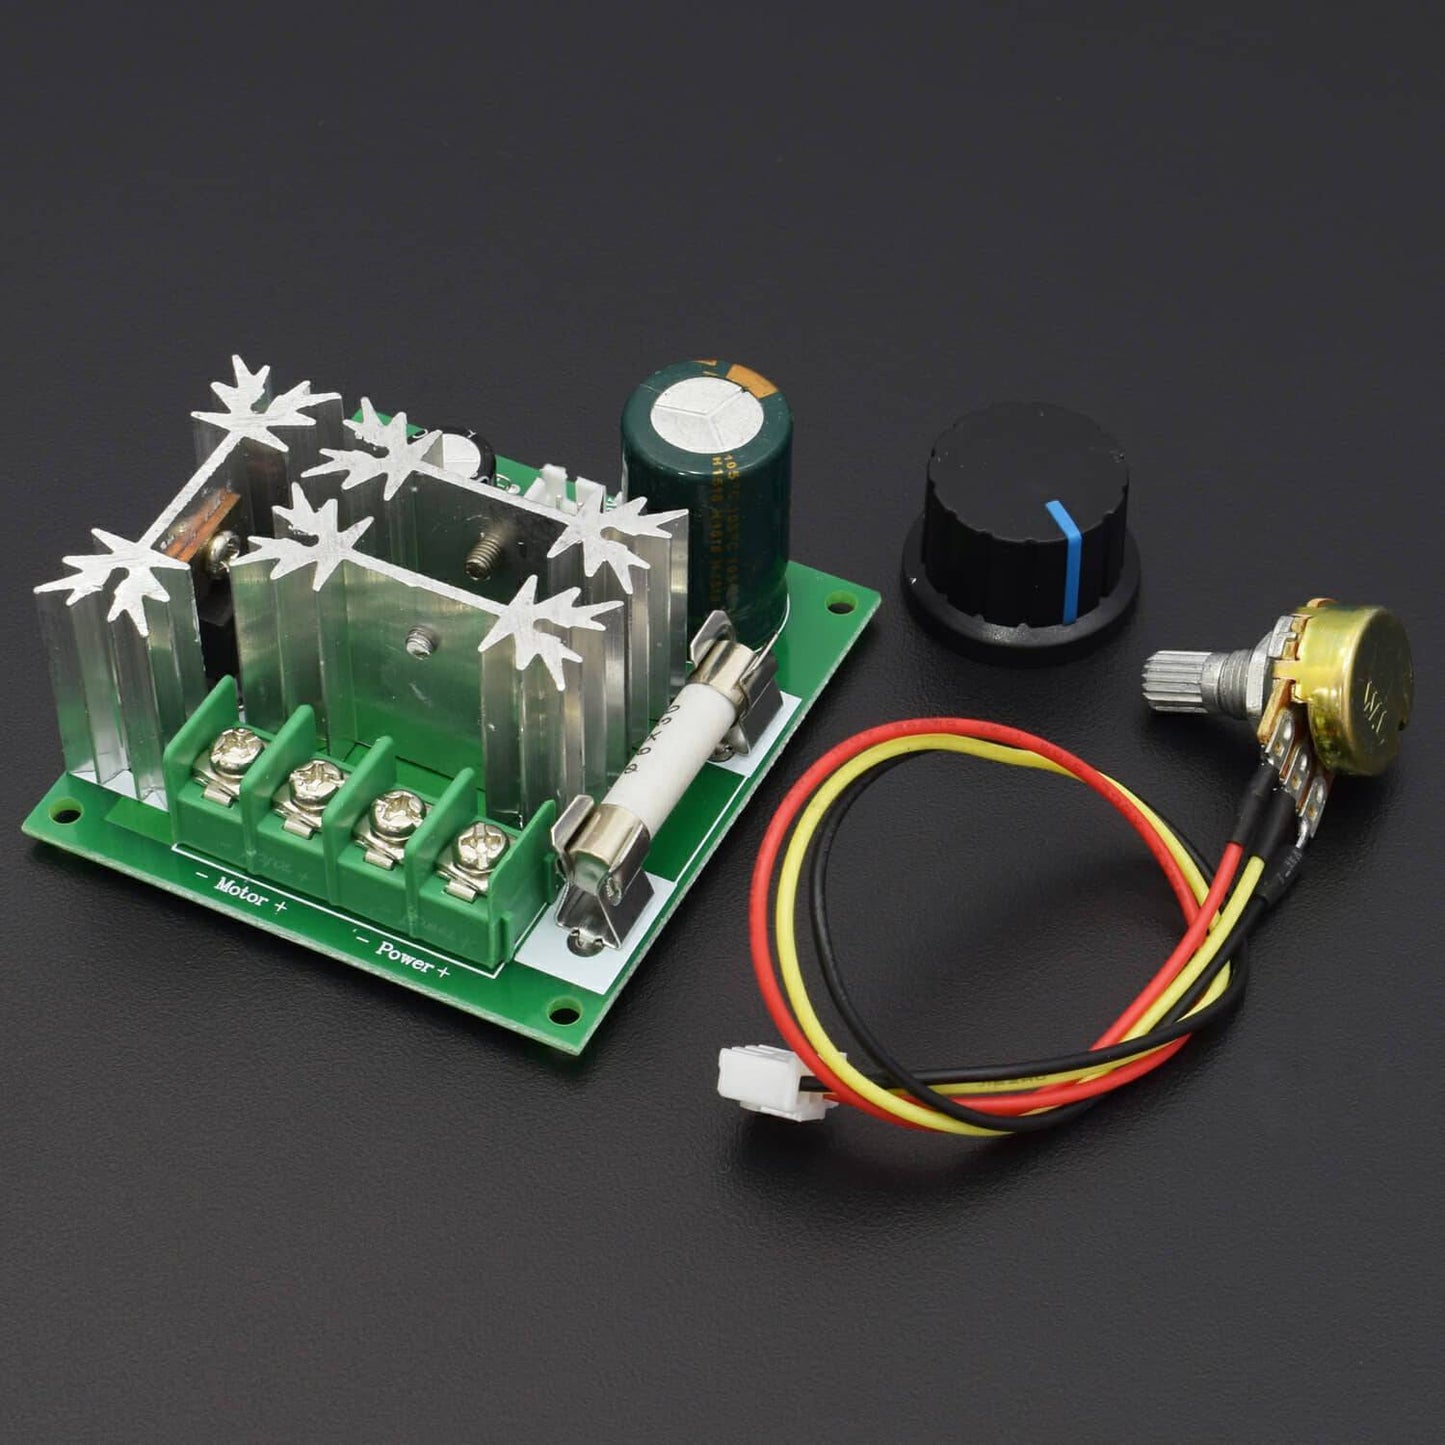 6V 90V 15A Pulse Width PWM DC Motor Speed Controller Switch - RS707 - REES52